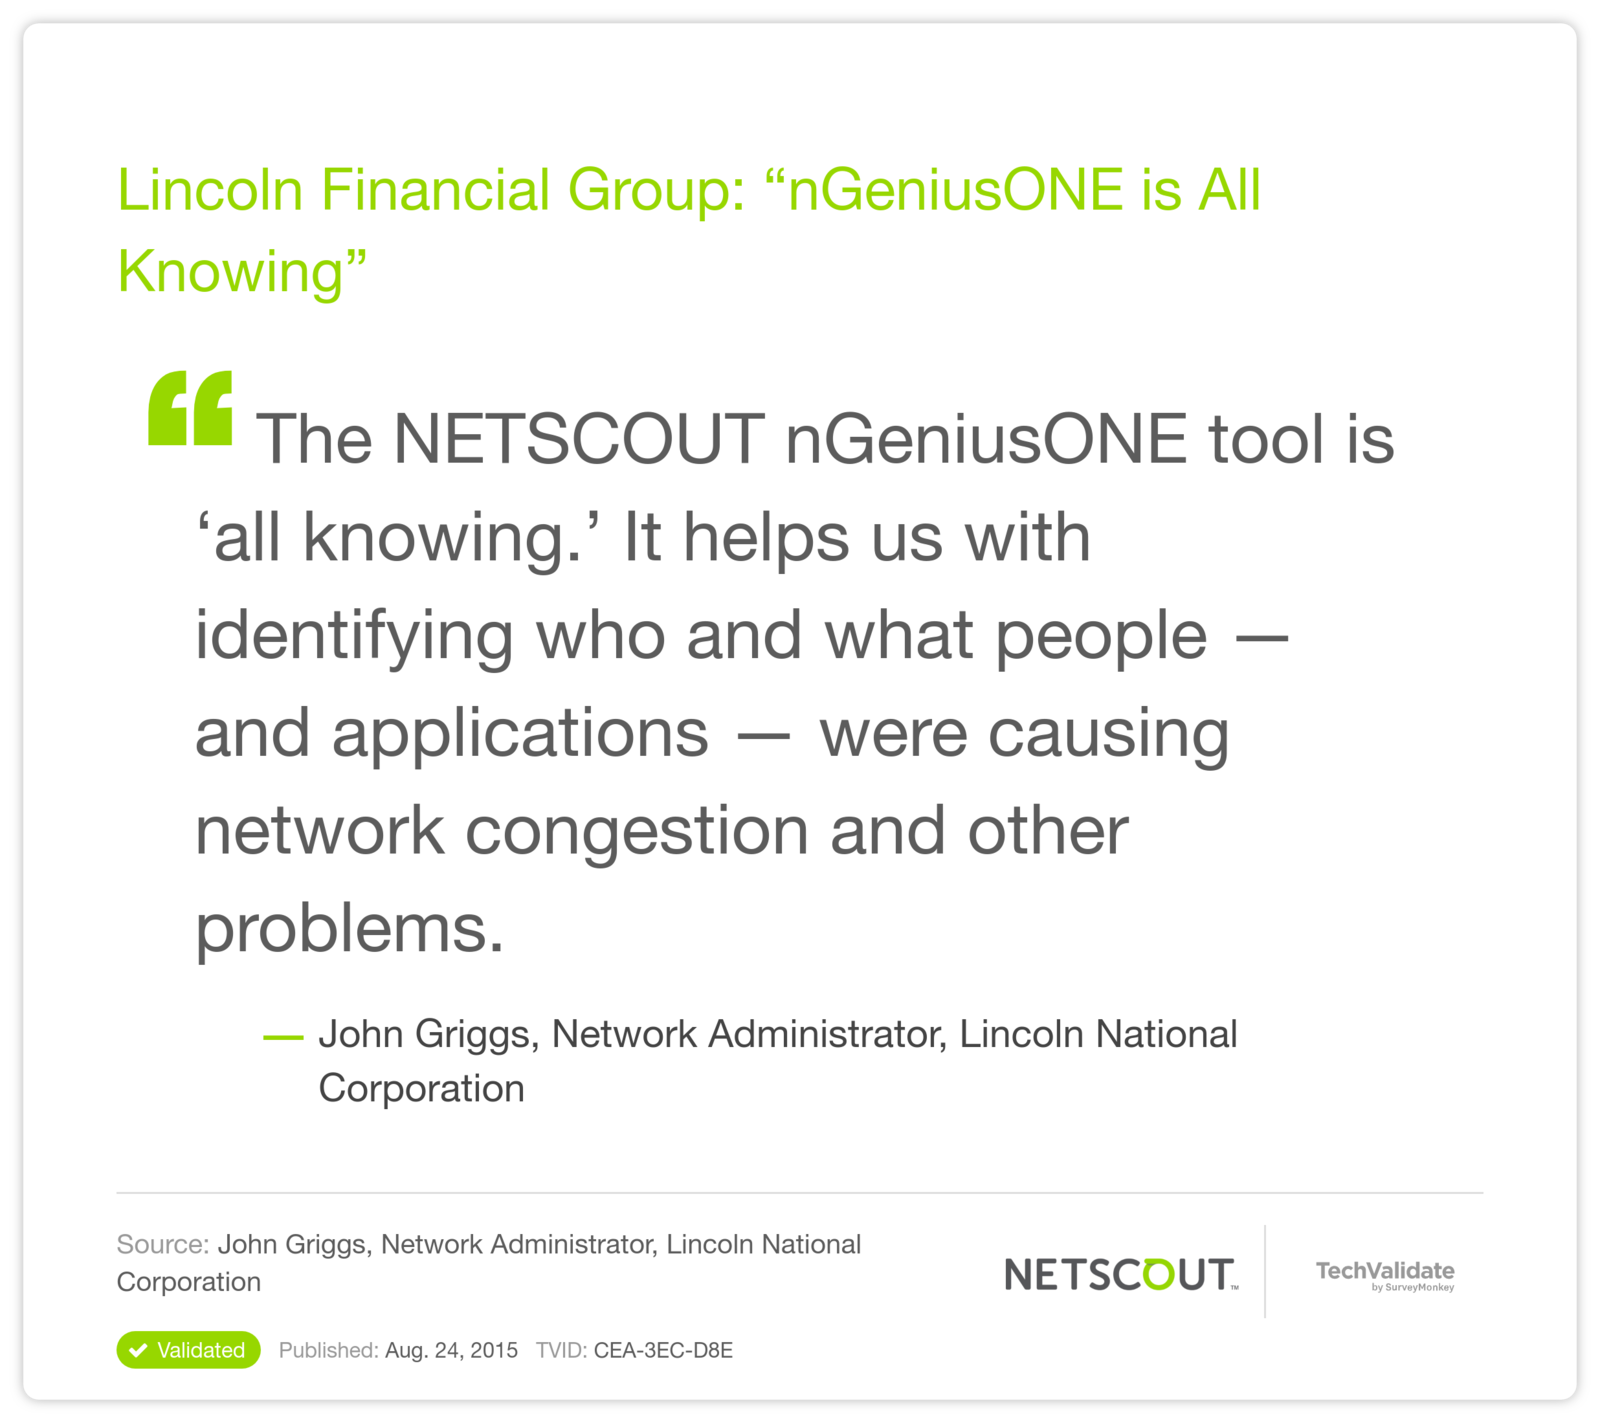 Lincoln Financial Group: "nGeniusONE is All Knowing"